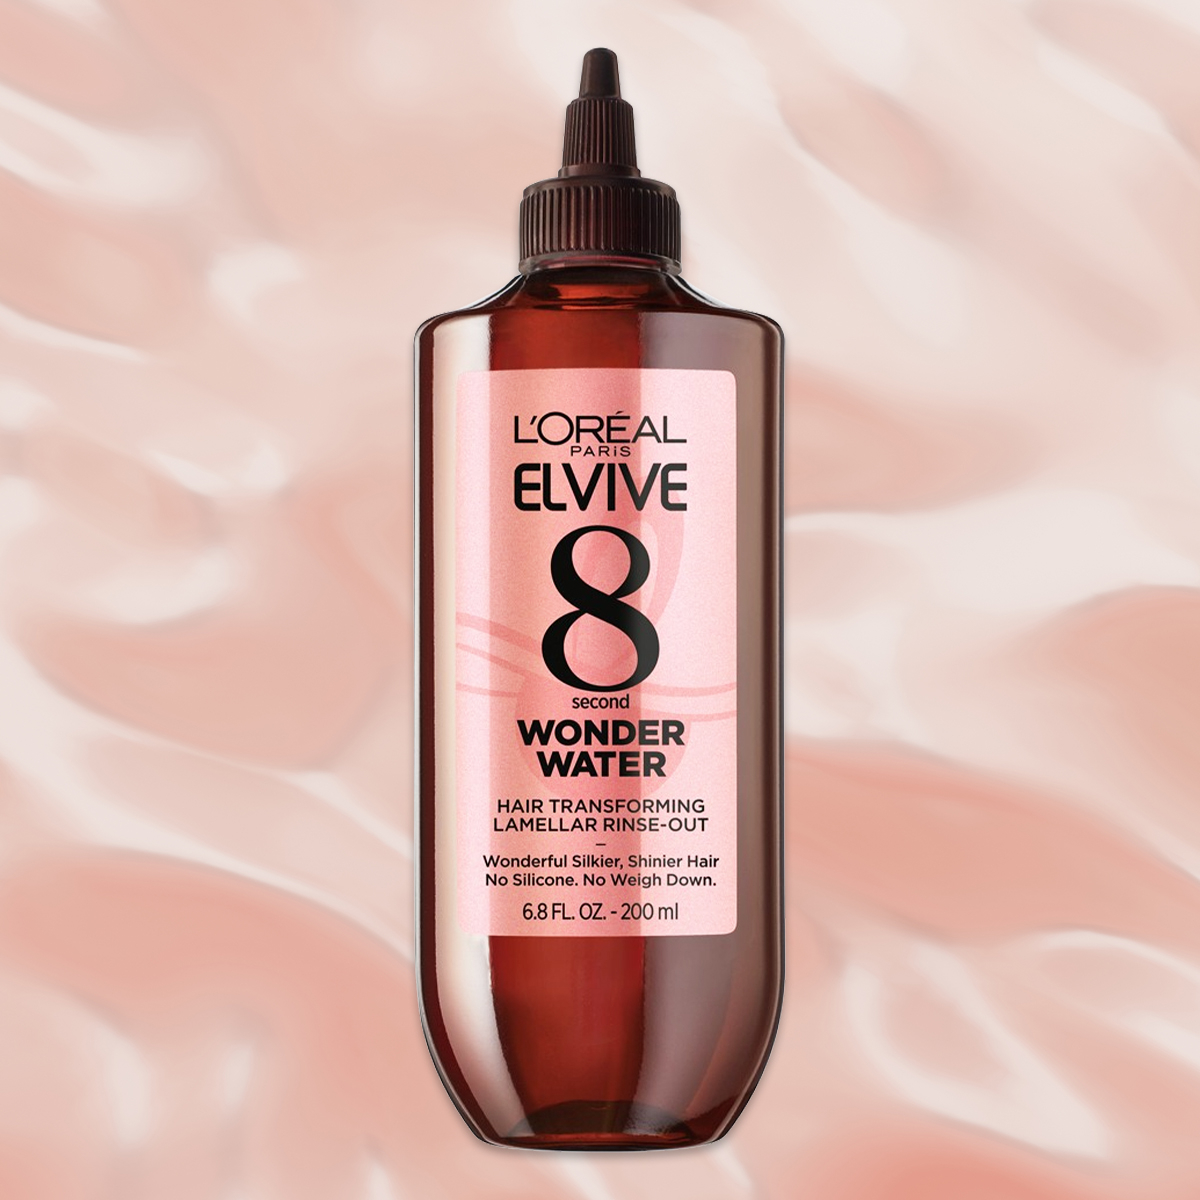 Shoppers Love This Wonder Water Hair Treatment & It's $7 Today